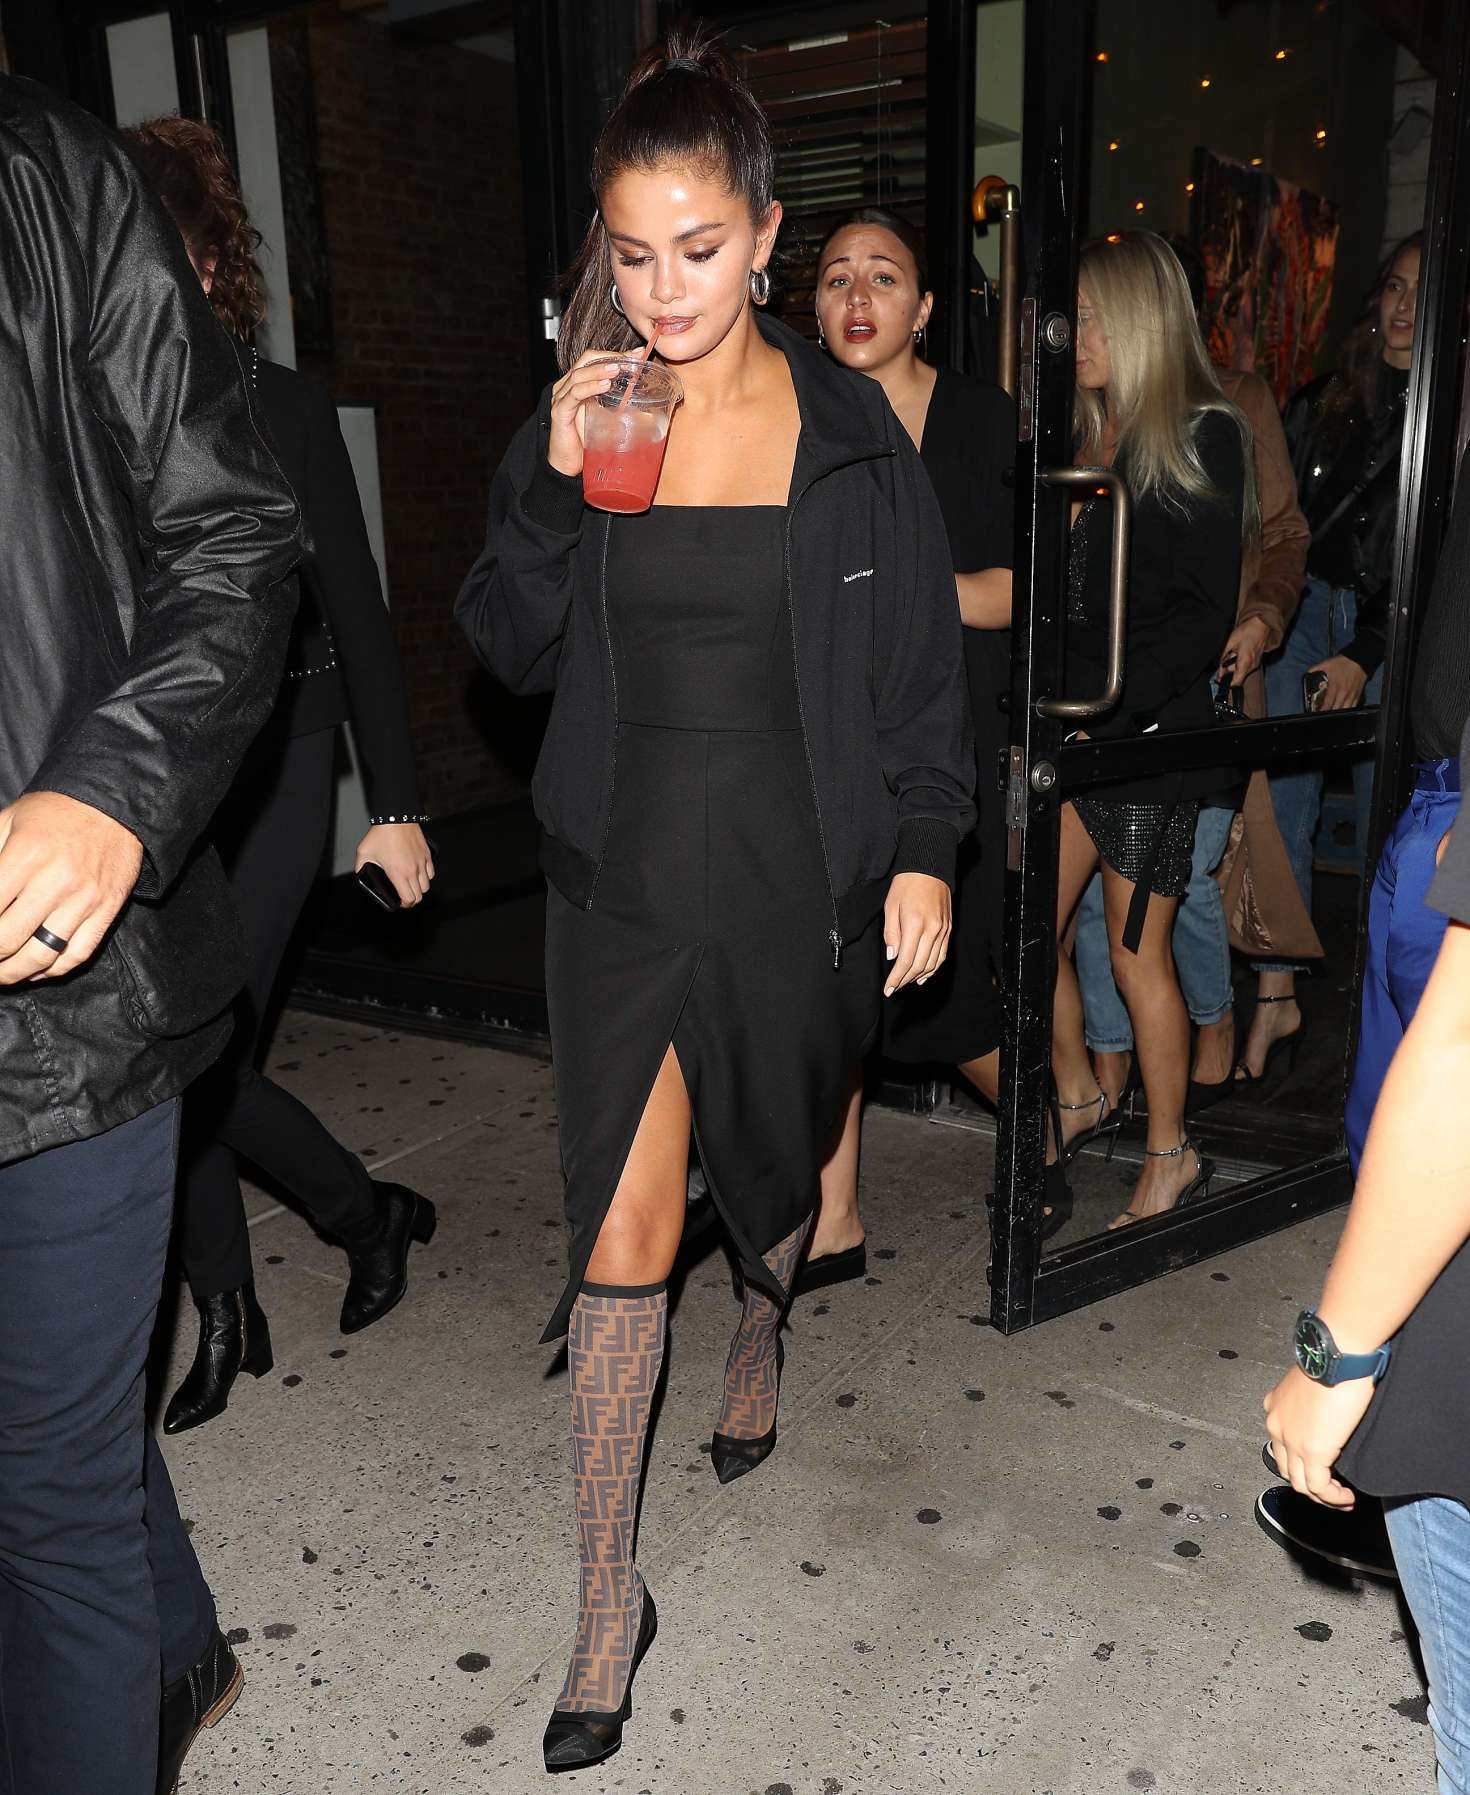 Selena Gomez in Black Dress â€“ Night out in NYC